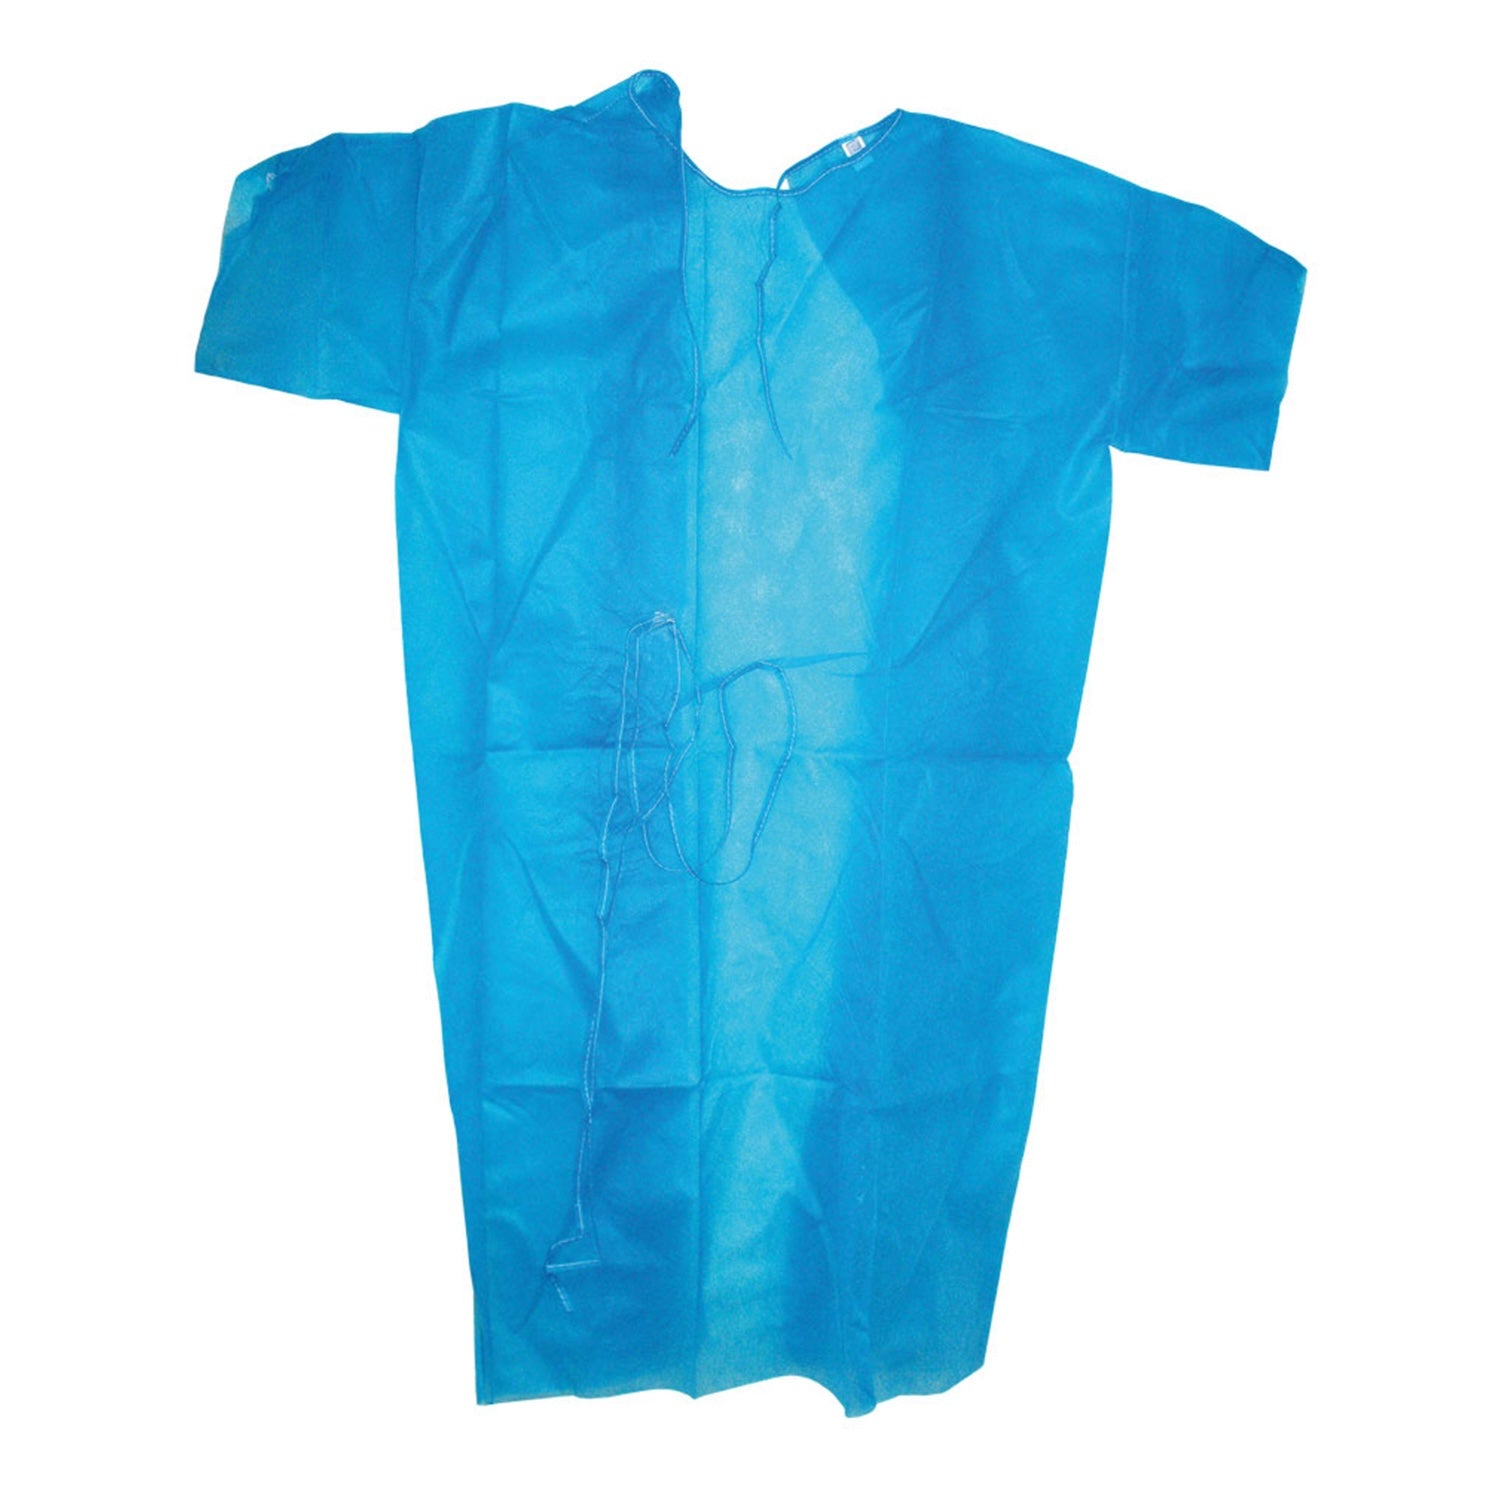 Premier Examination Gown | Short Sleeves | Blue | Pack of 50 (2)